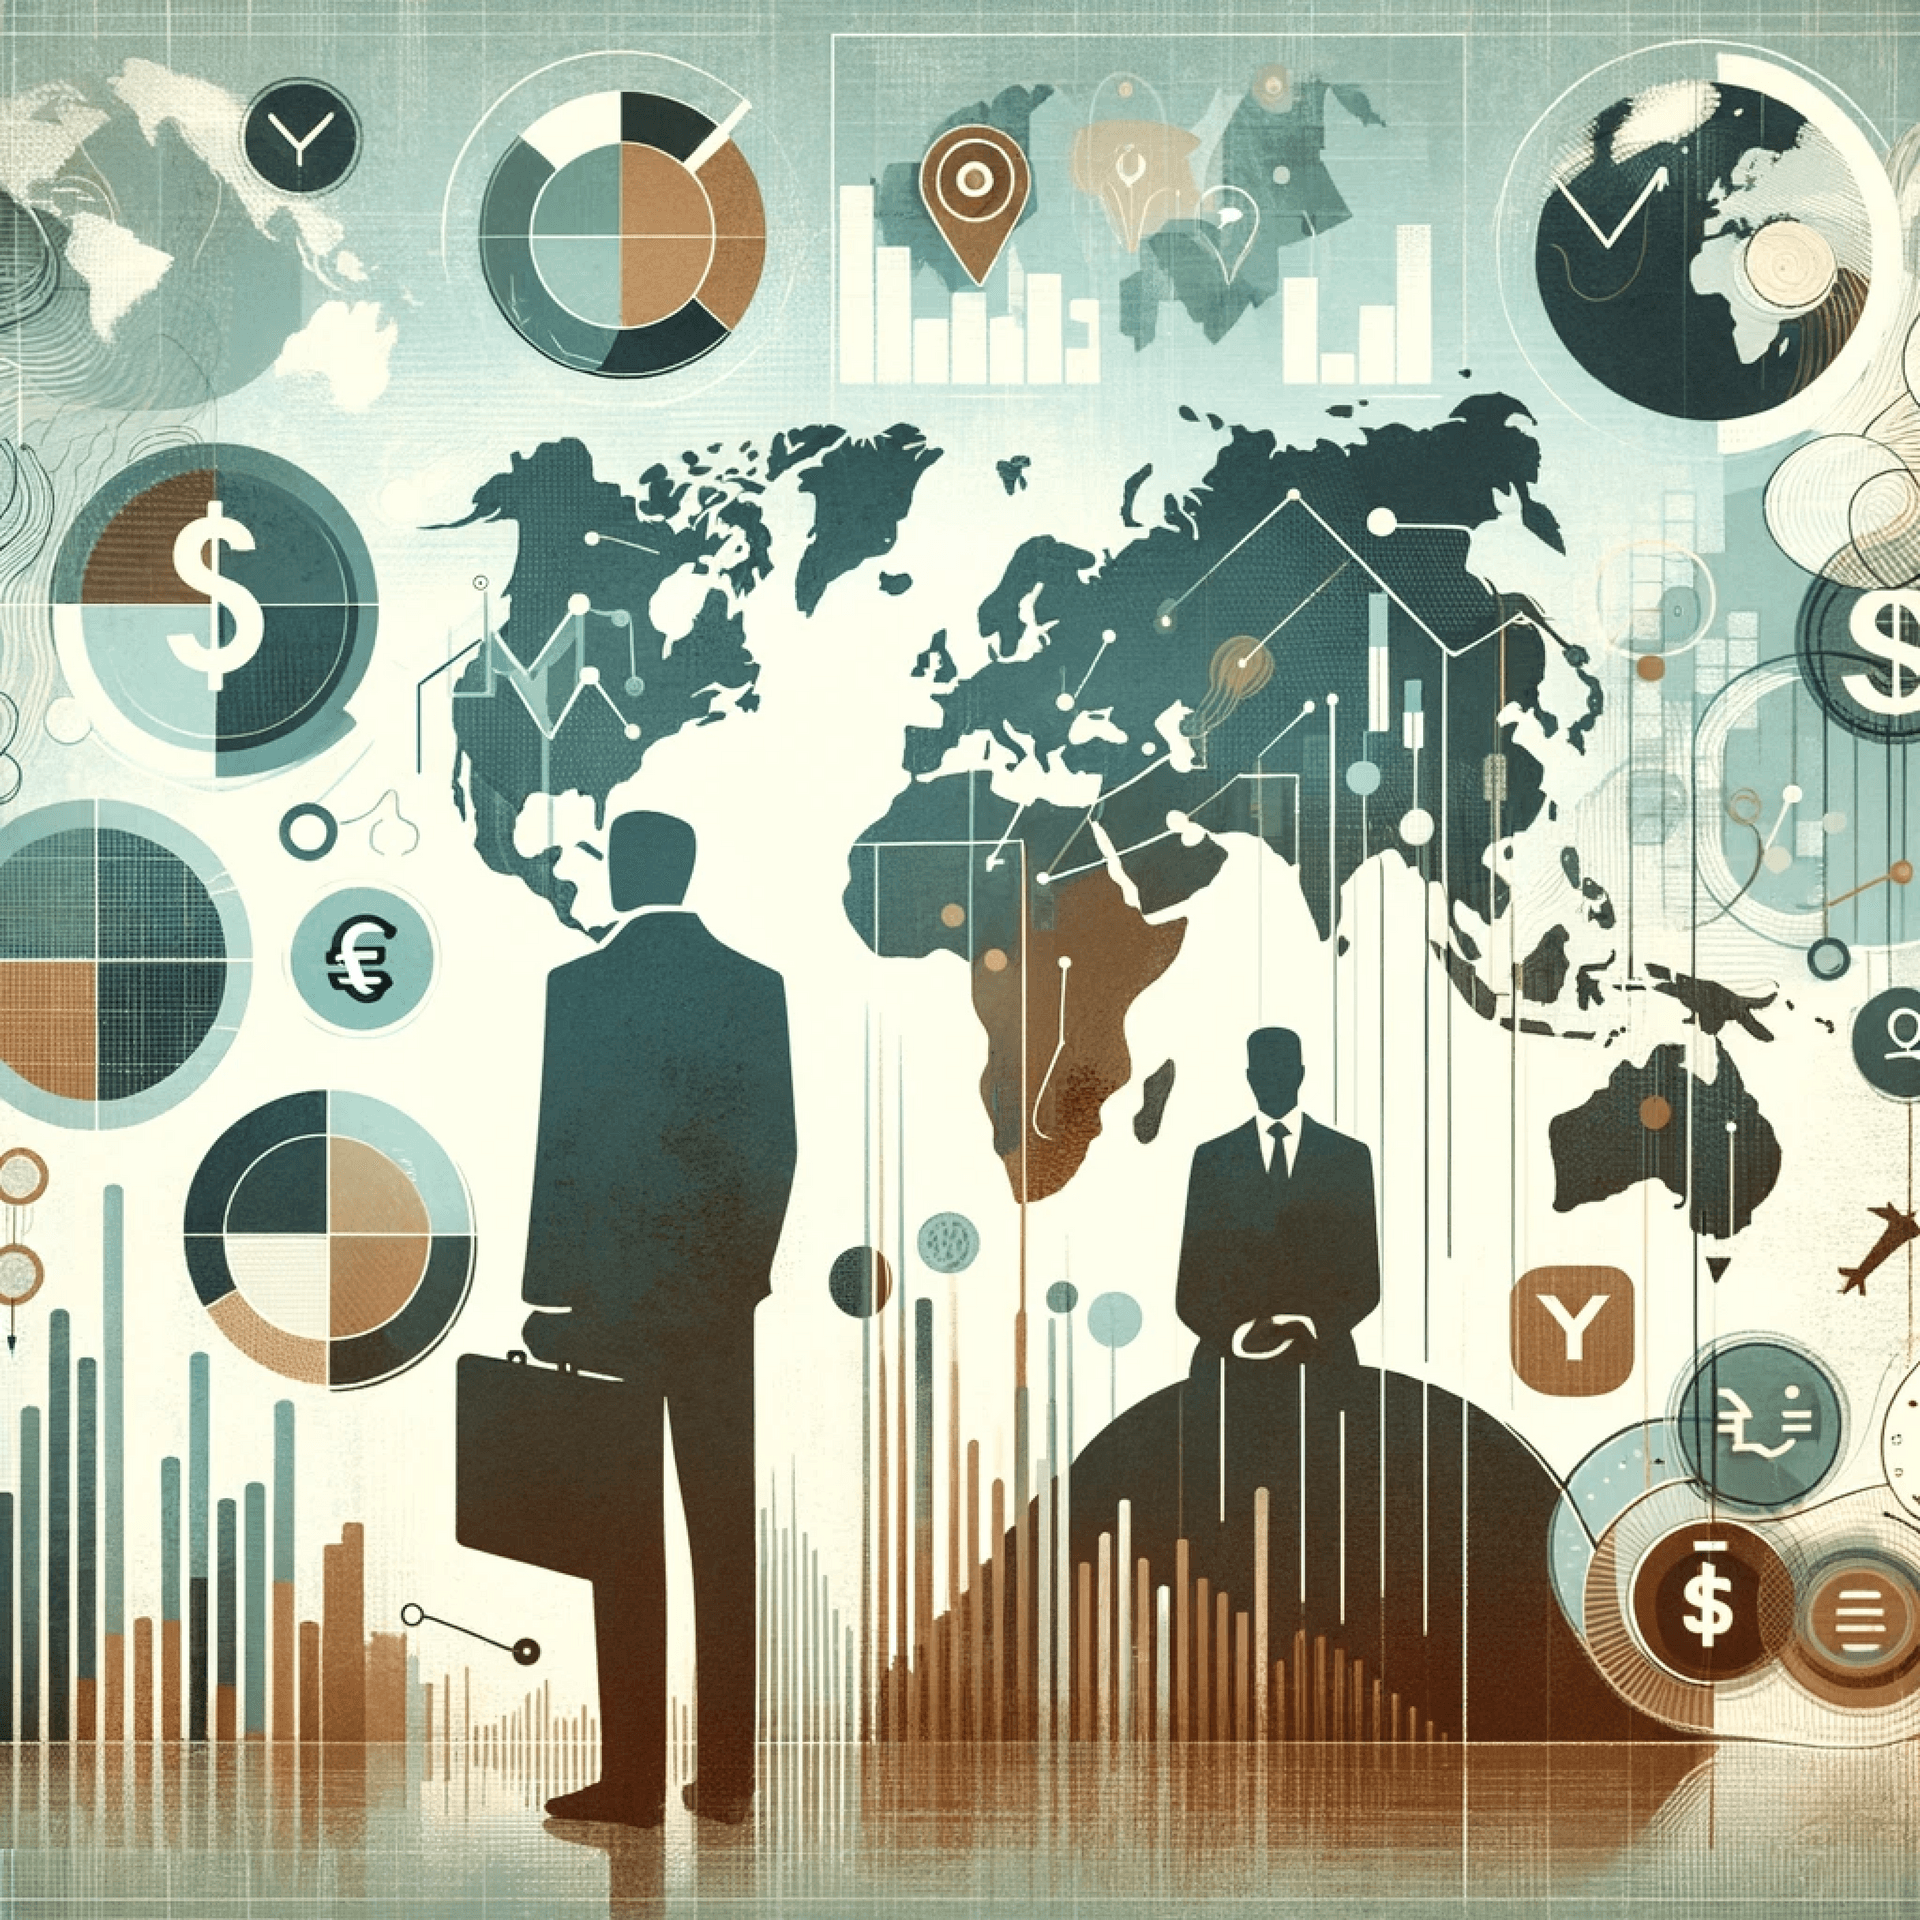 Market analysis for business case studies. Visual elements include global maps, demographic icons, and currency symbols, representing market reach and consumer diversity. Style is sophisticated with a color palette of muted, professional tones. Abstract figures are depicted analyzing data and engaging in strategic planning, symbolizing a collaborative approach to understanding market dynamics.